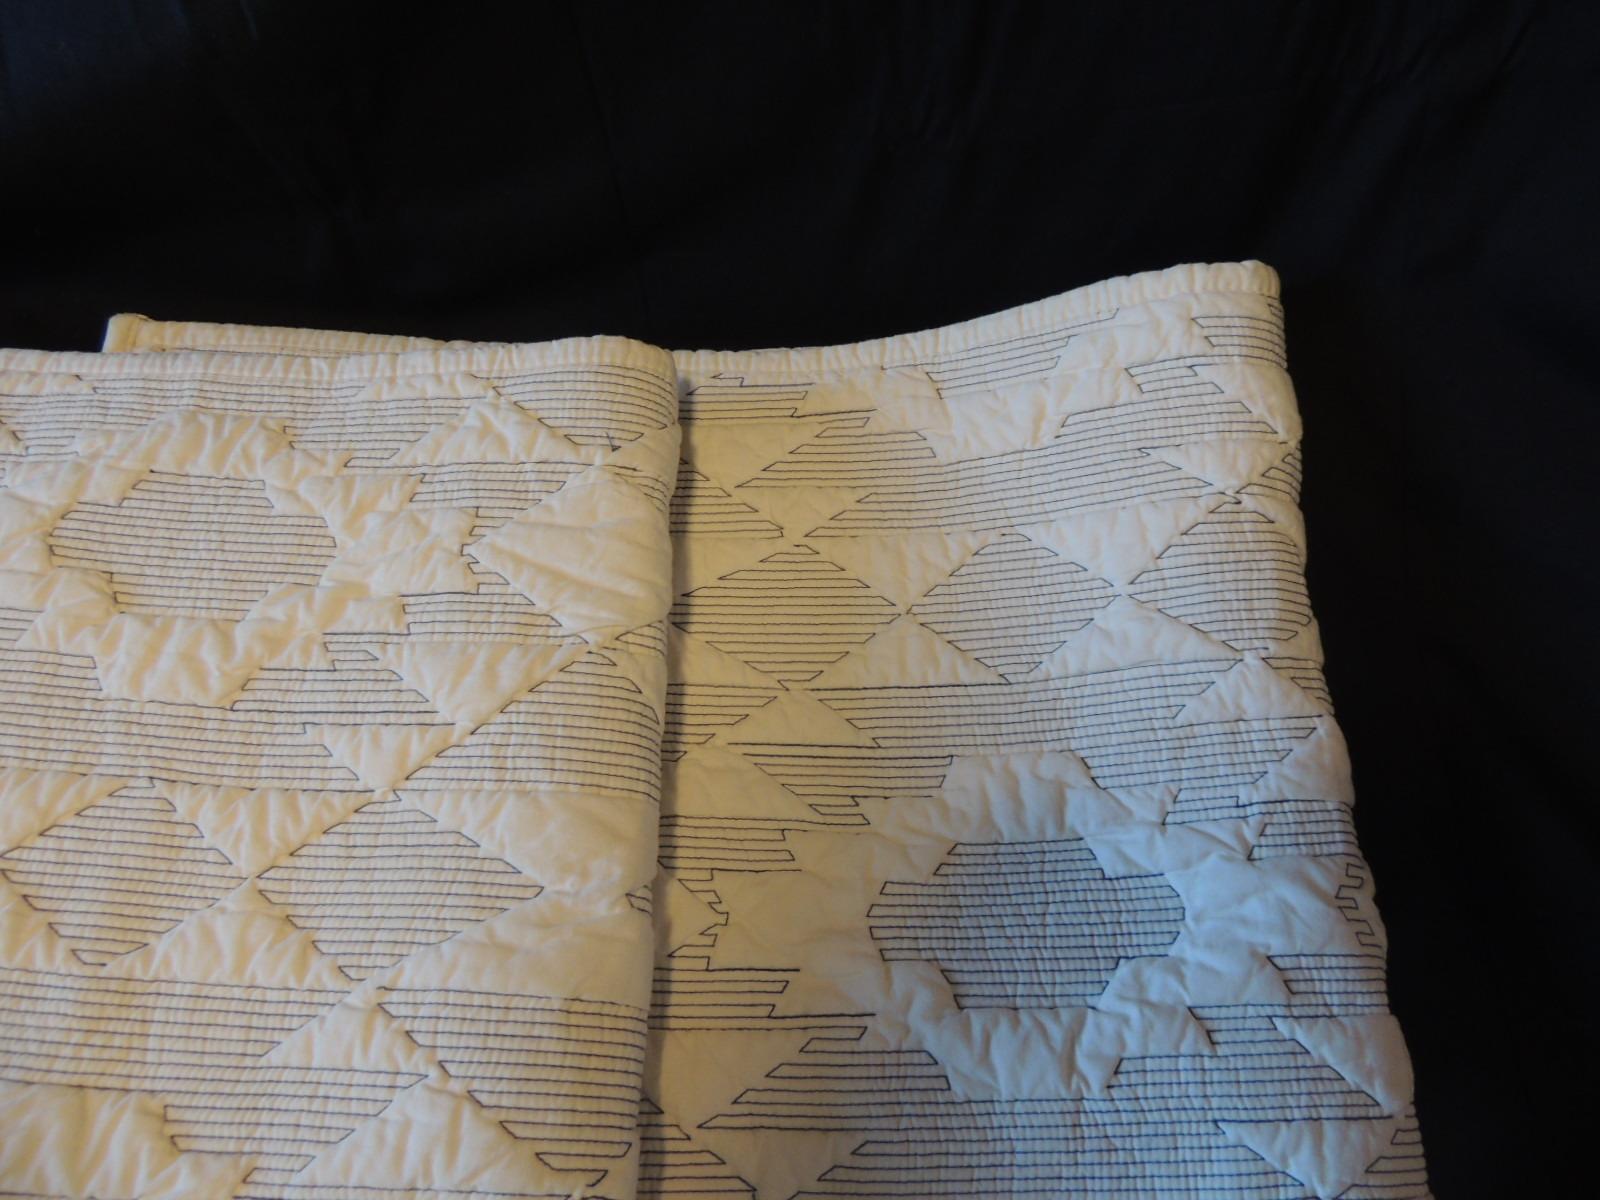 Pair of king size Pendleton quilted pillow cases.
Navajo style pattern with cotton backings. Natural color cotton with blue threads.
Overlapping clouser.
Pillow cases only (no inserts)
Size: 20